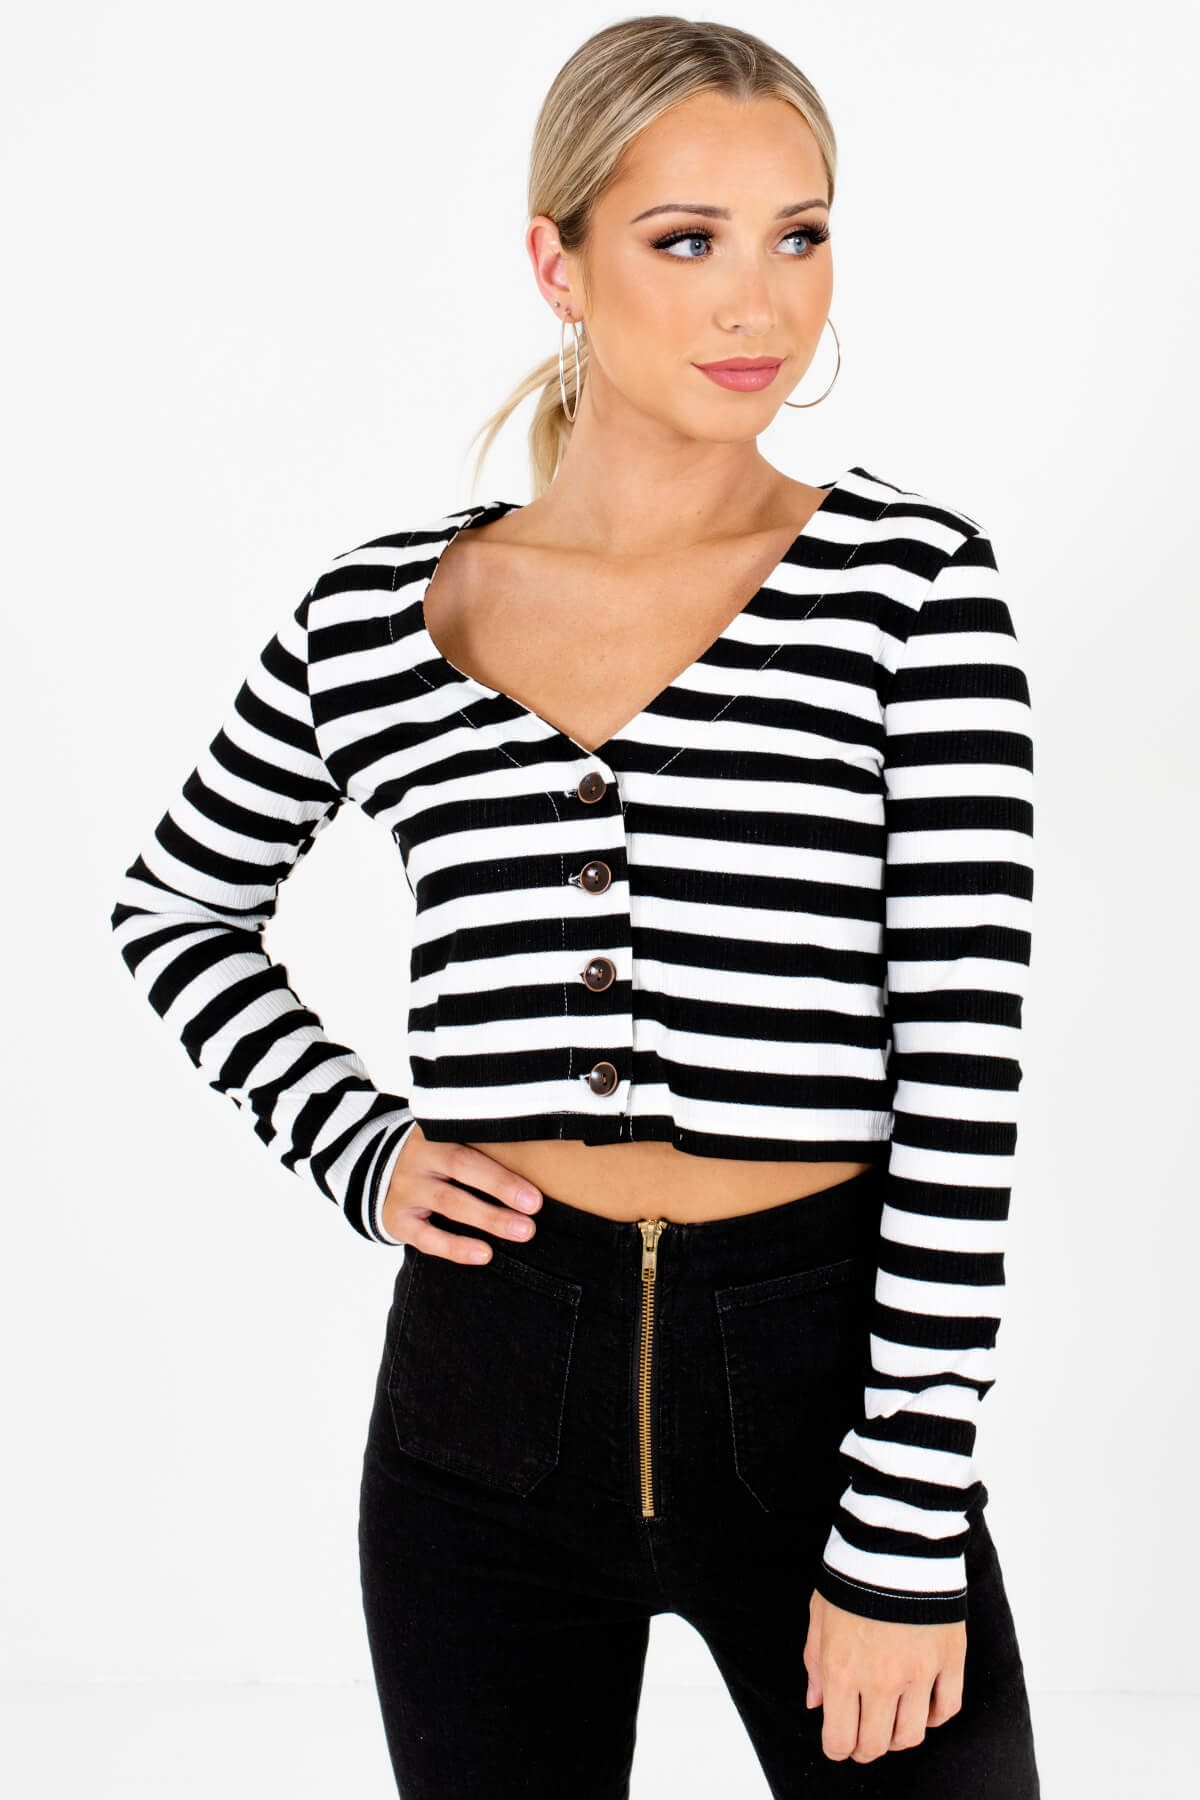 Black and White Striped Boutique Crop Tops for Women